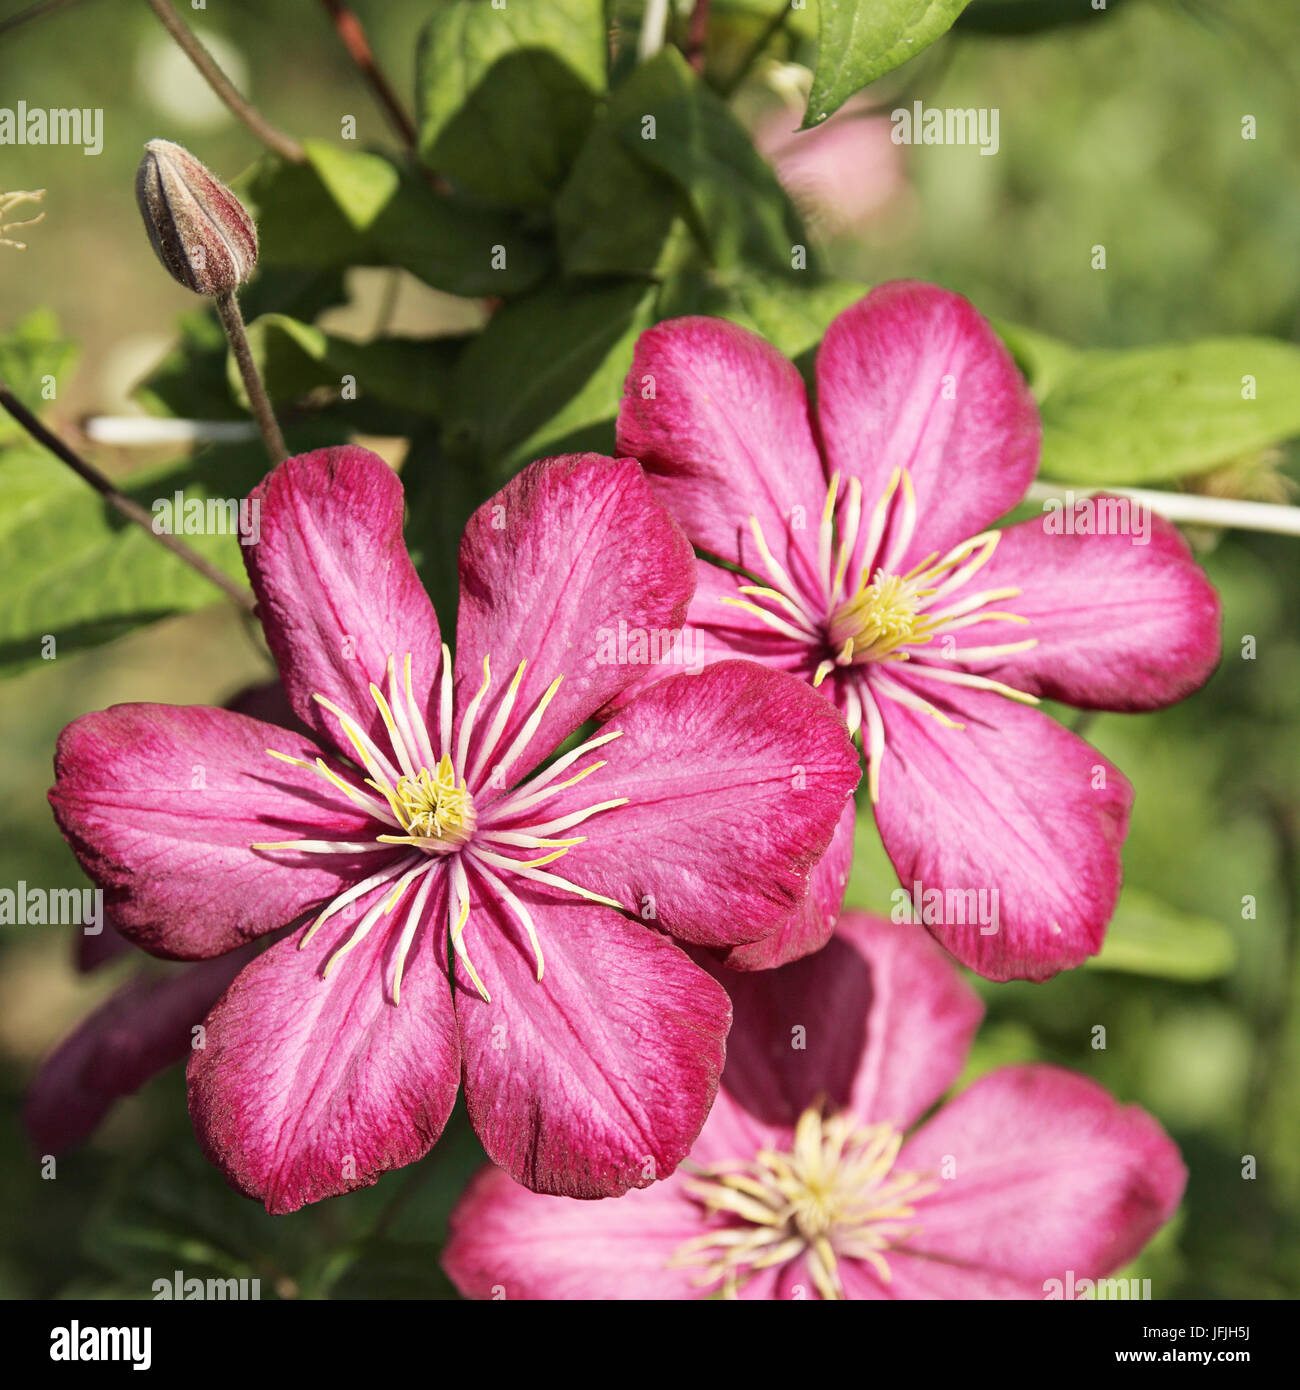 Flowers of clematis on a yard Stock Photo